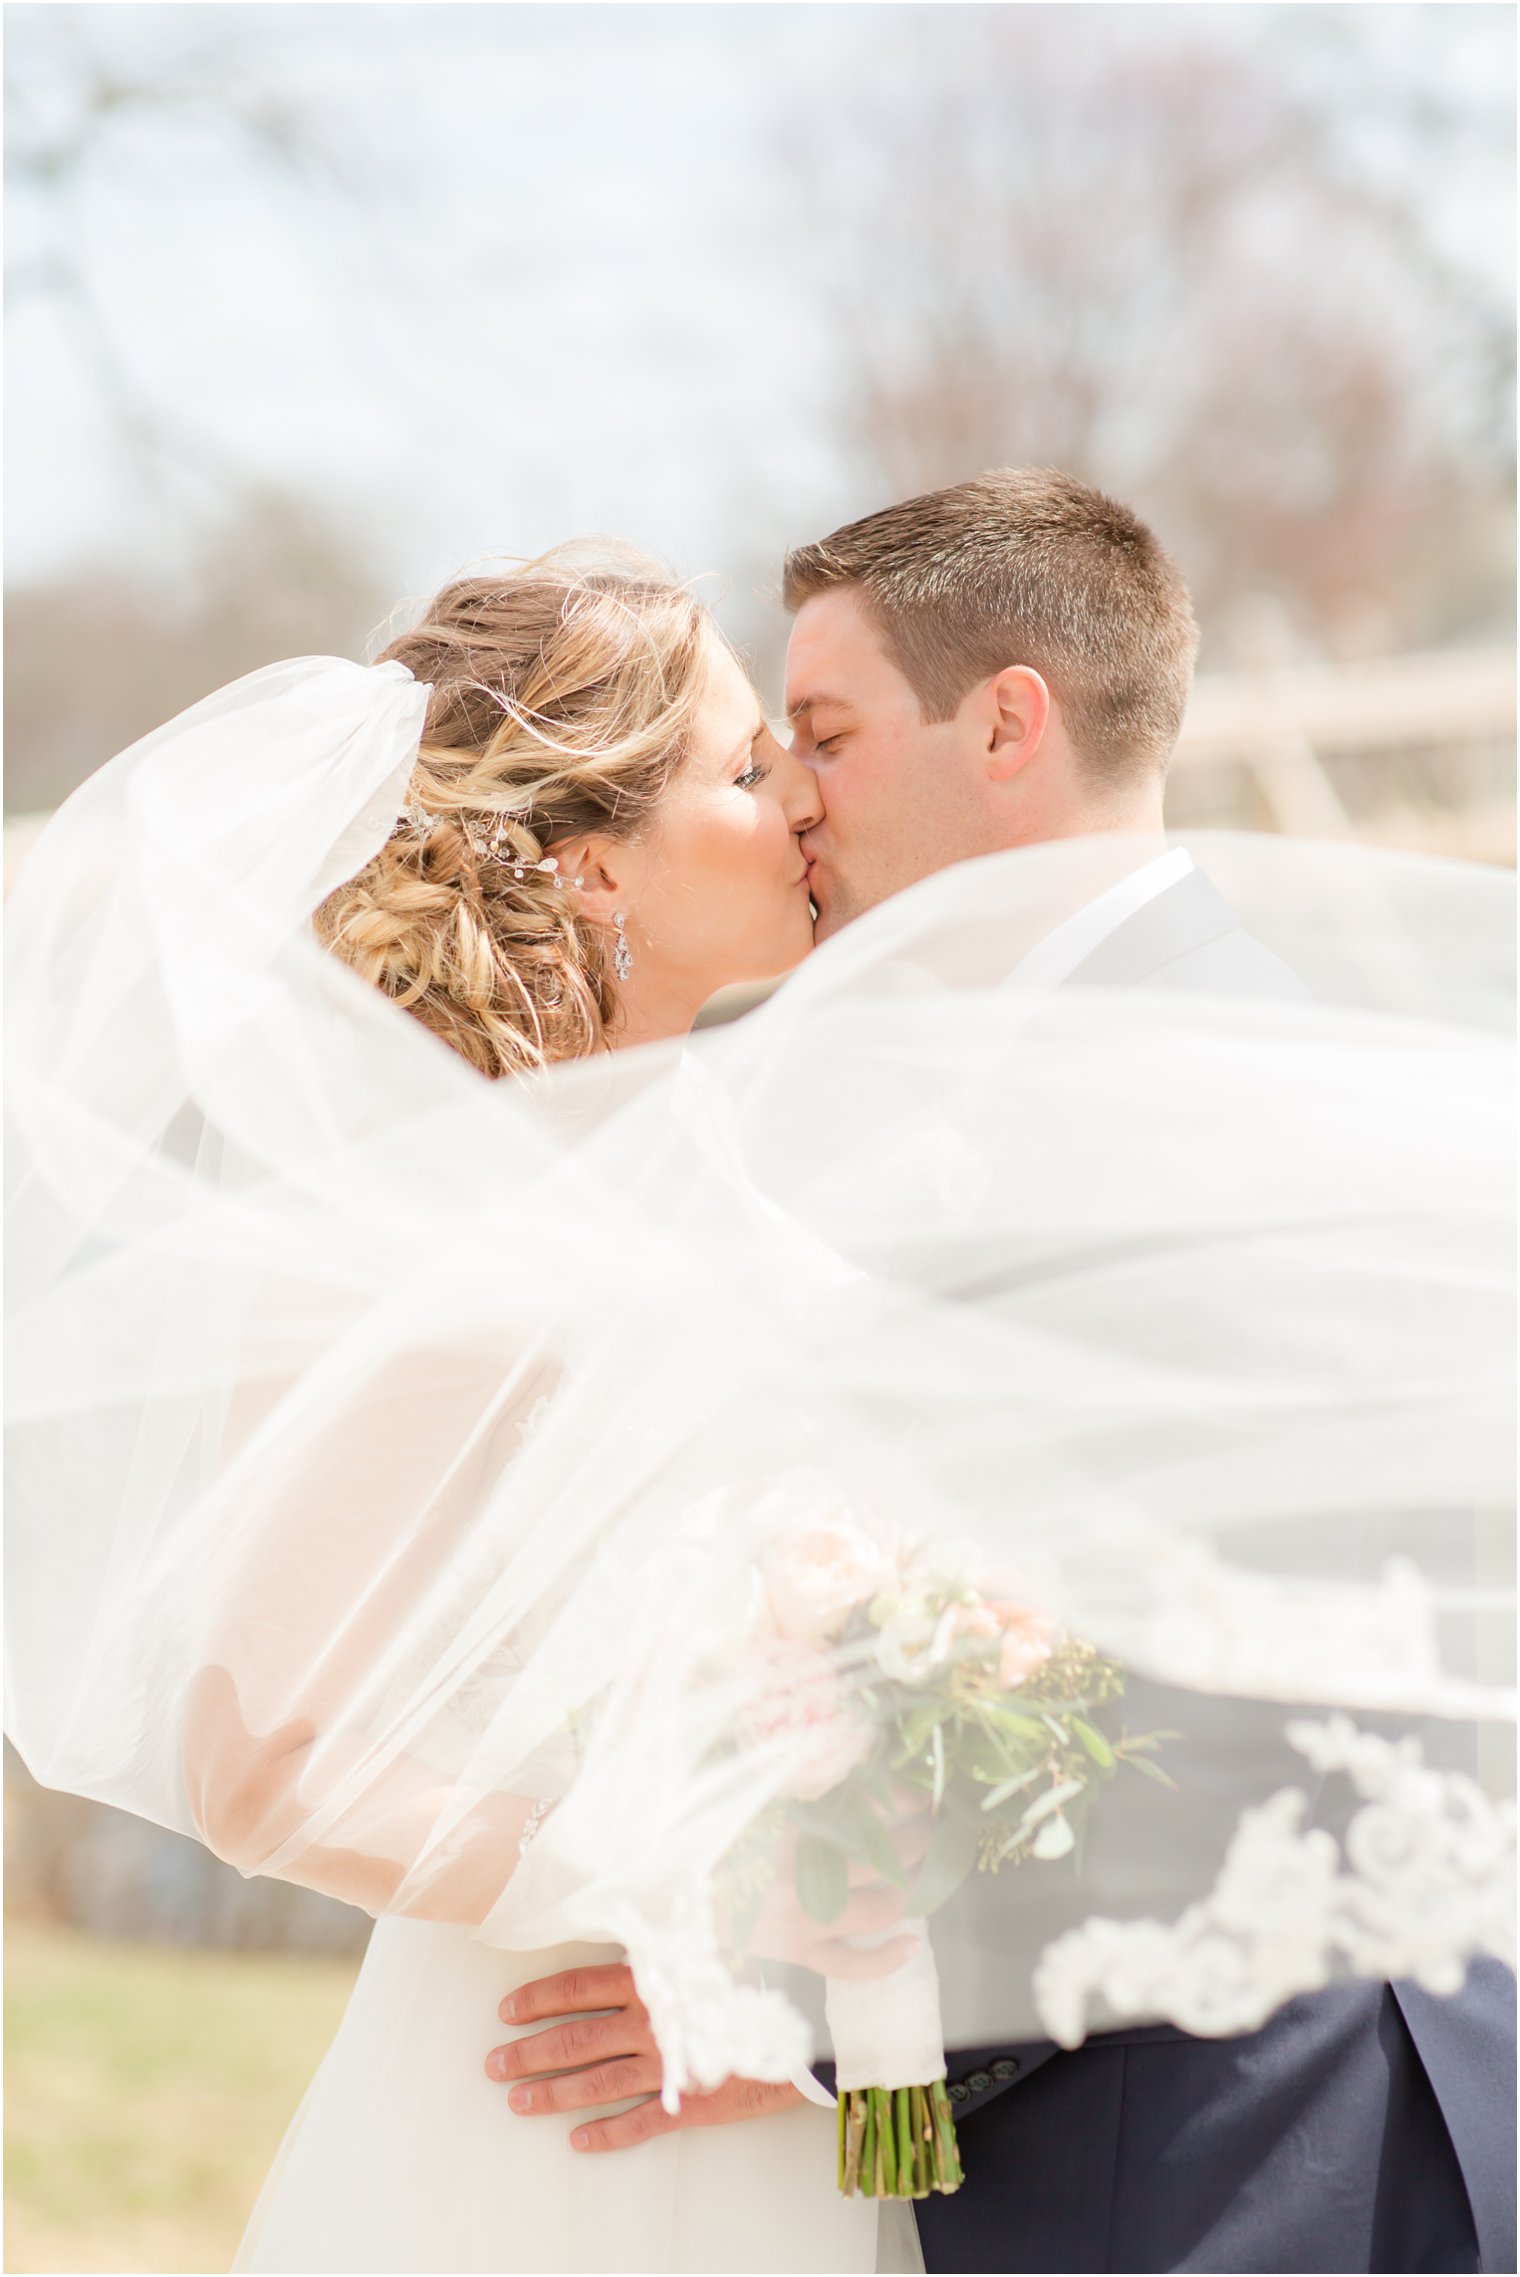 Romantic photo of bride and groom kissing in the wind